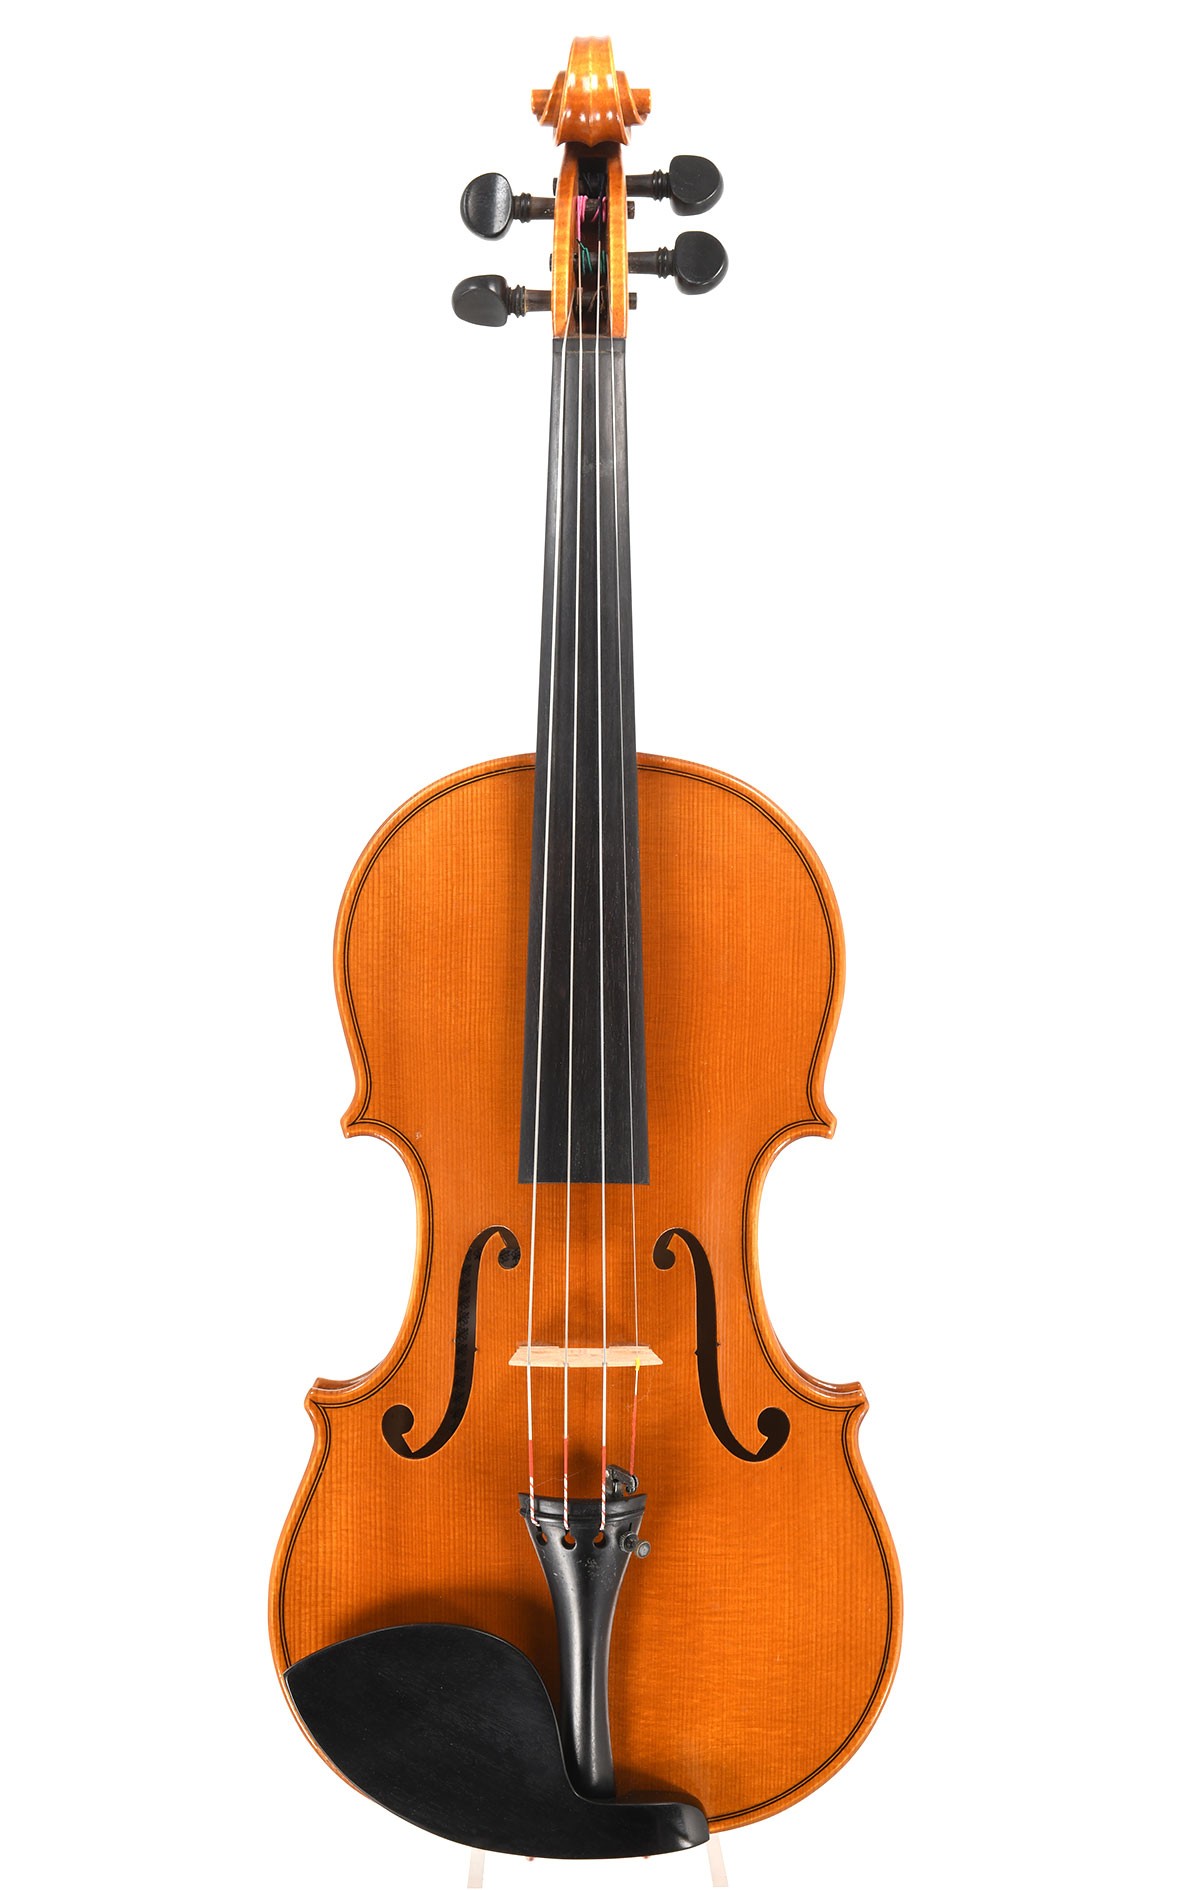 SALE French violin of the brand "Nicolas Mansuy" from the studio of Jean-Jacques Pages